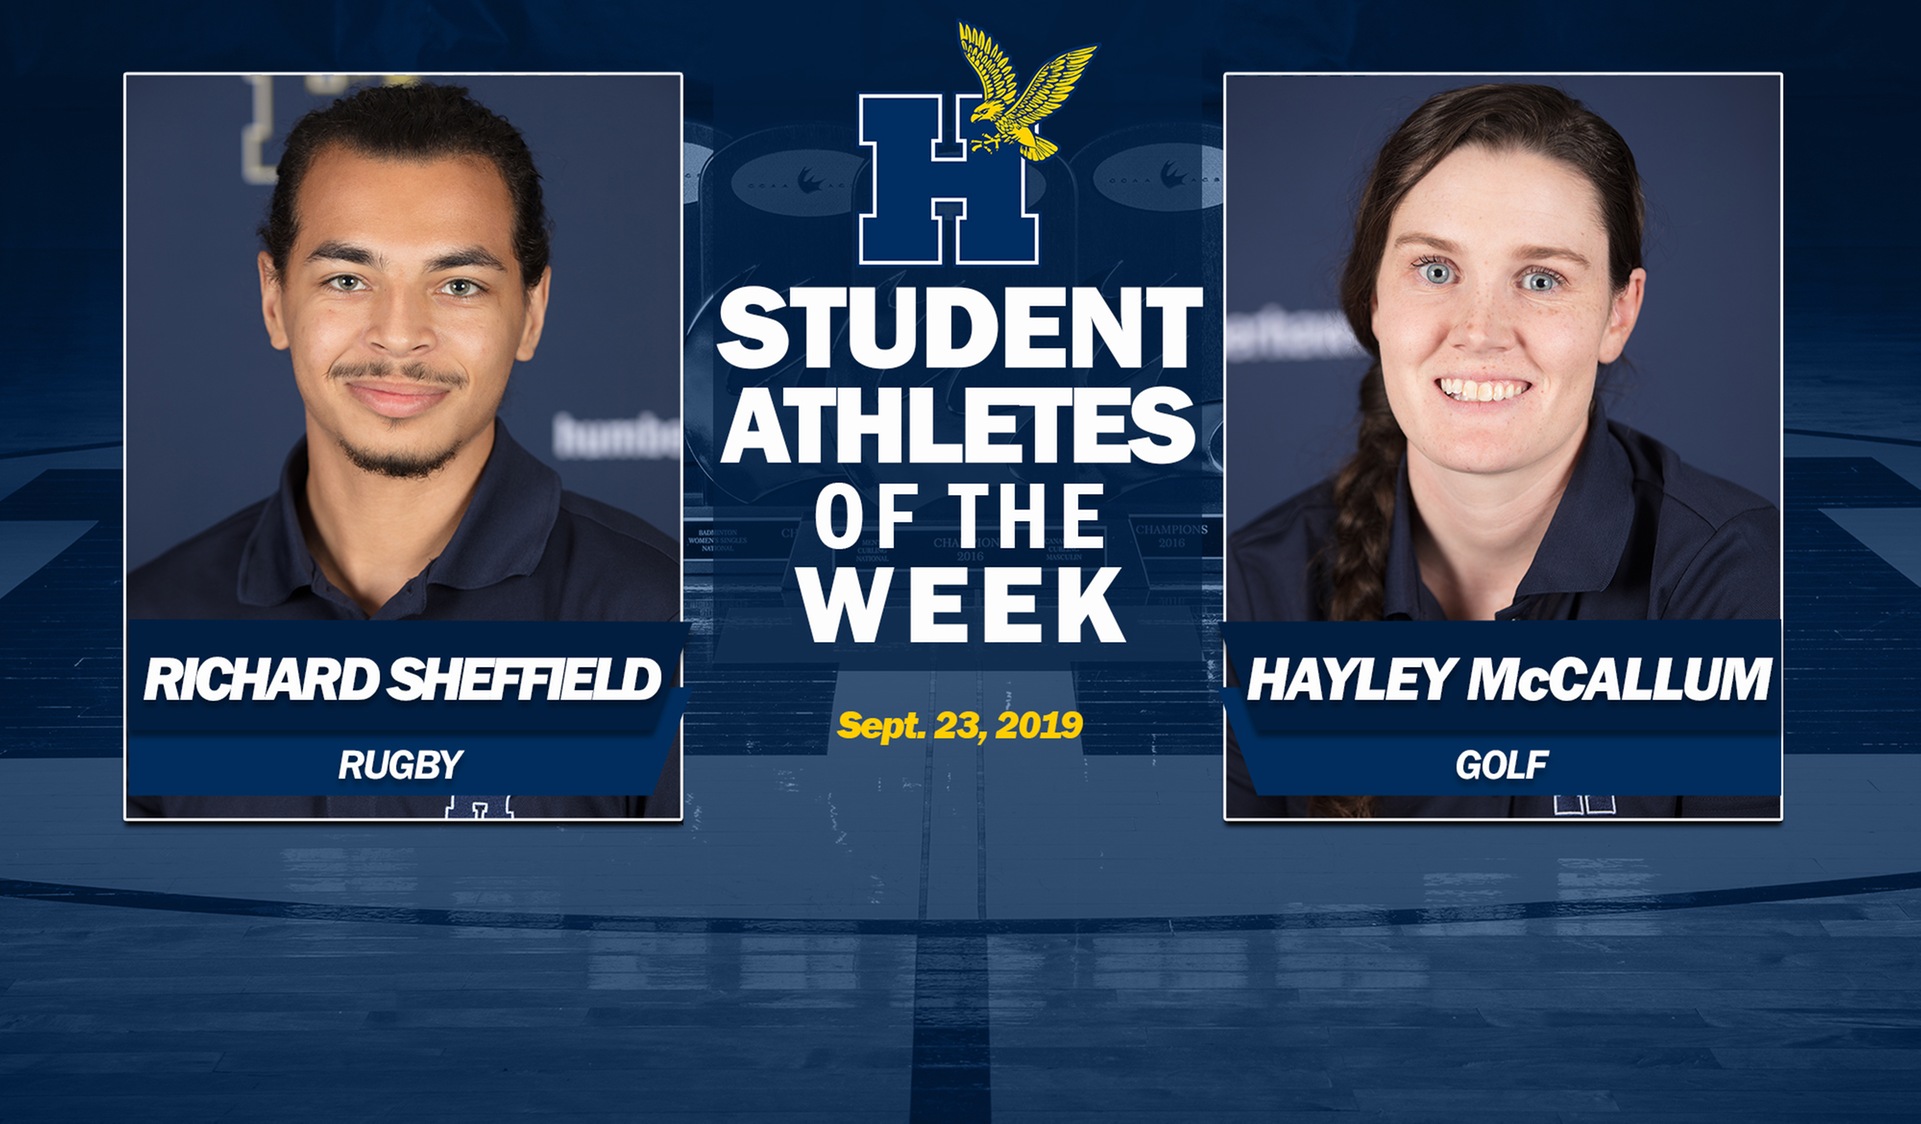 McCallum, Sheffield Earn Humber Student-Athletes of the Week Honours